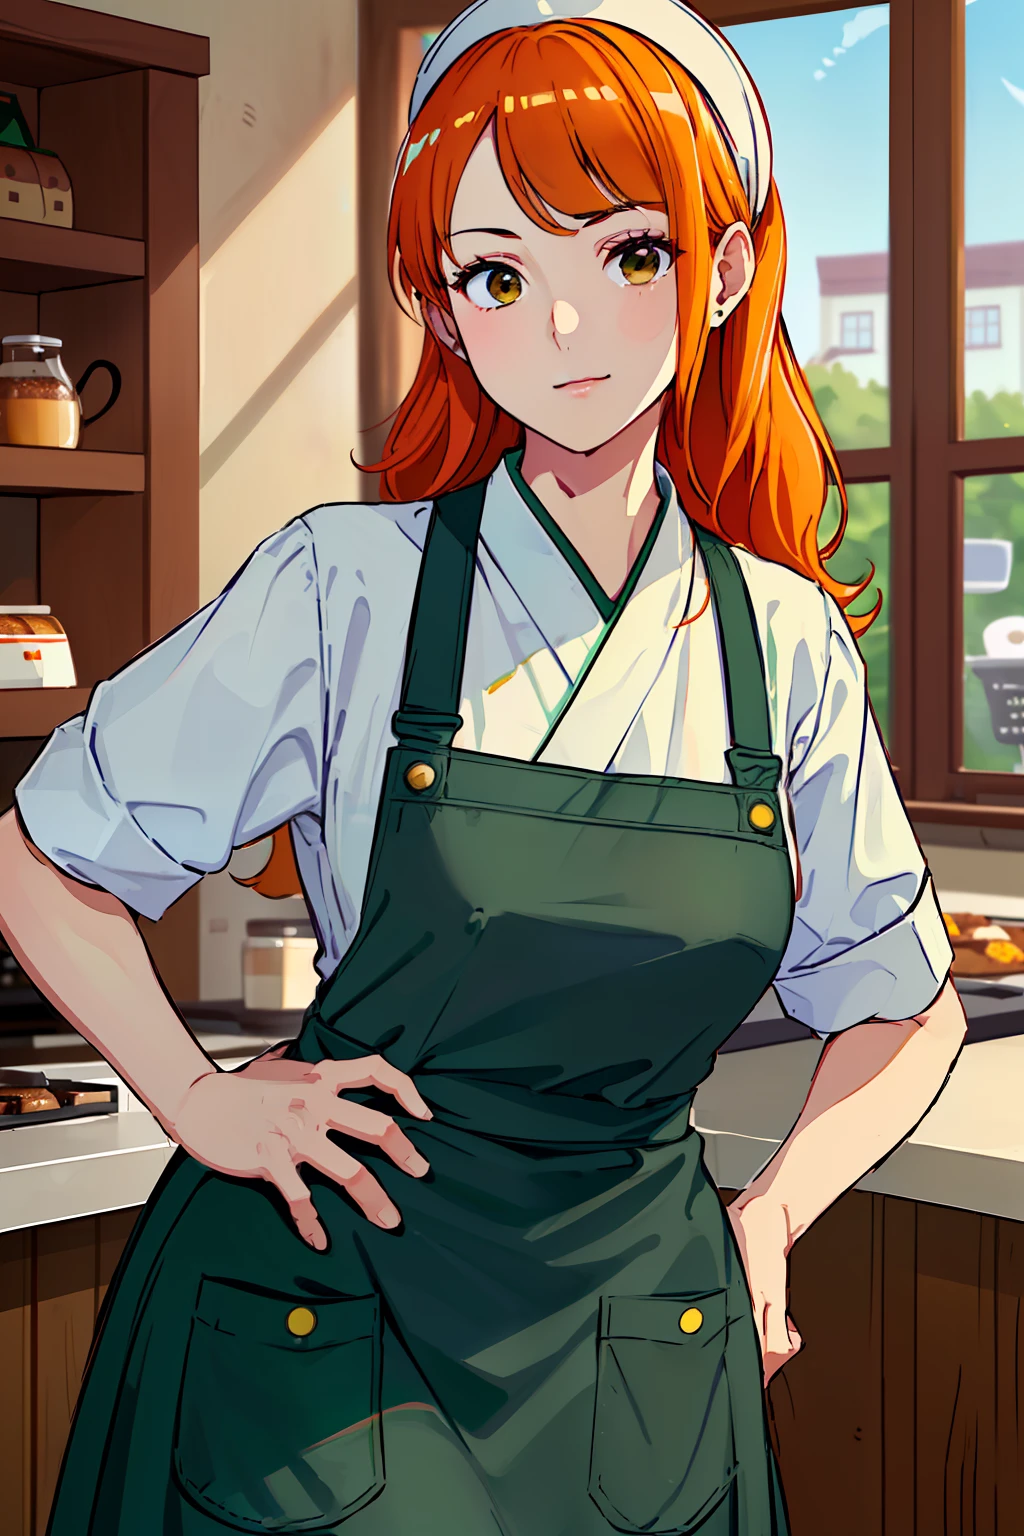 arafeel woman in 緑 エプロン standing in front of counter with coffee, starbucks エプロンs and visors, ( ウェイトレス ) 女の子, mysterious coffee shop 女の子, wearing an エプロン, RRダイナーの制服を着用, ( ( dark 緑, 作業着, エプロン, white waist エプロン and undershirt, white エプロン, sakimichan, #緑, 作業服, hanbok エプロン,黄色い髪